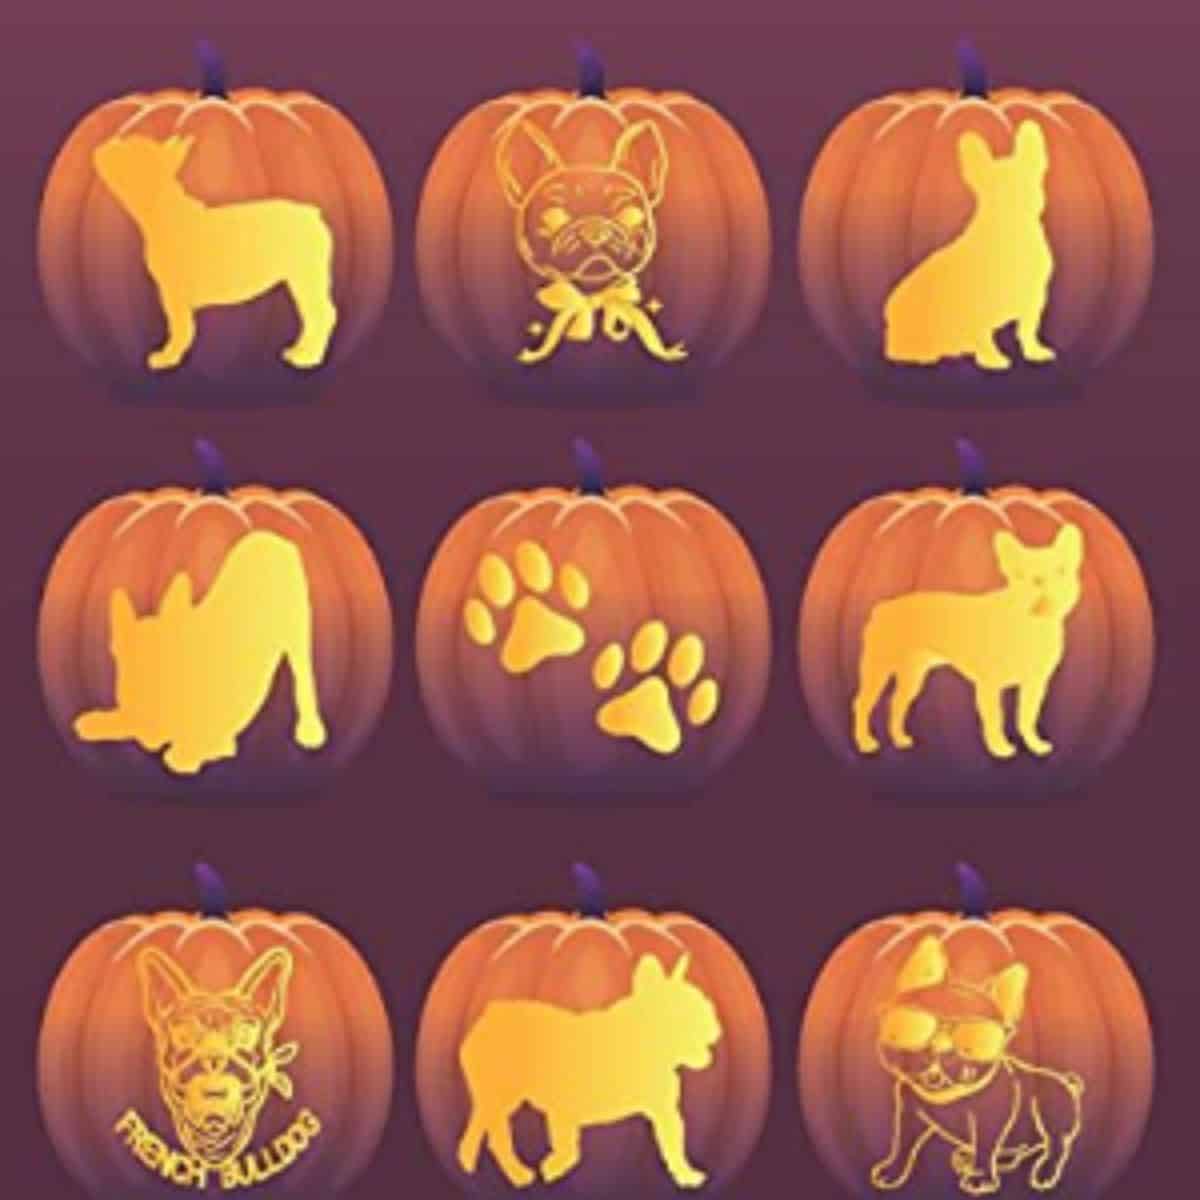 A group of 9 orange pumpkin carved with dog stencils.